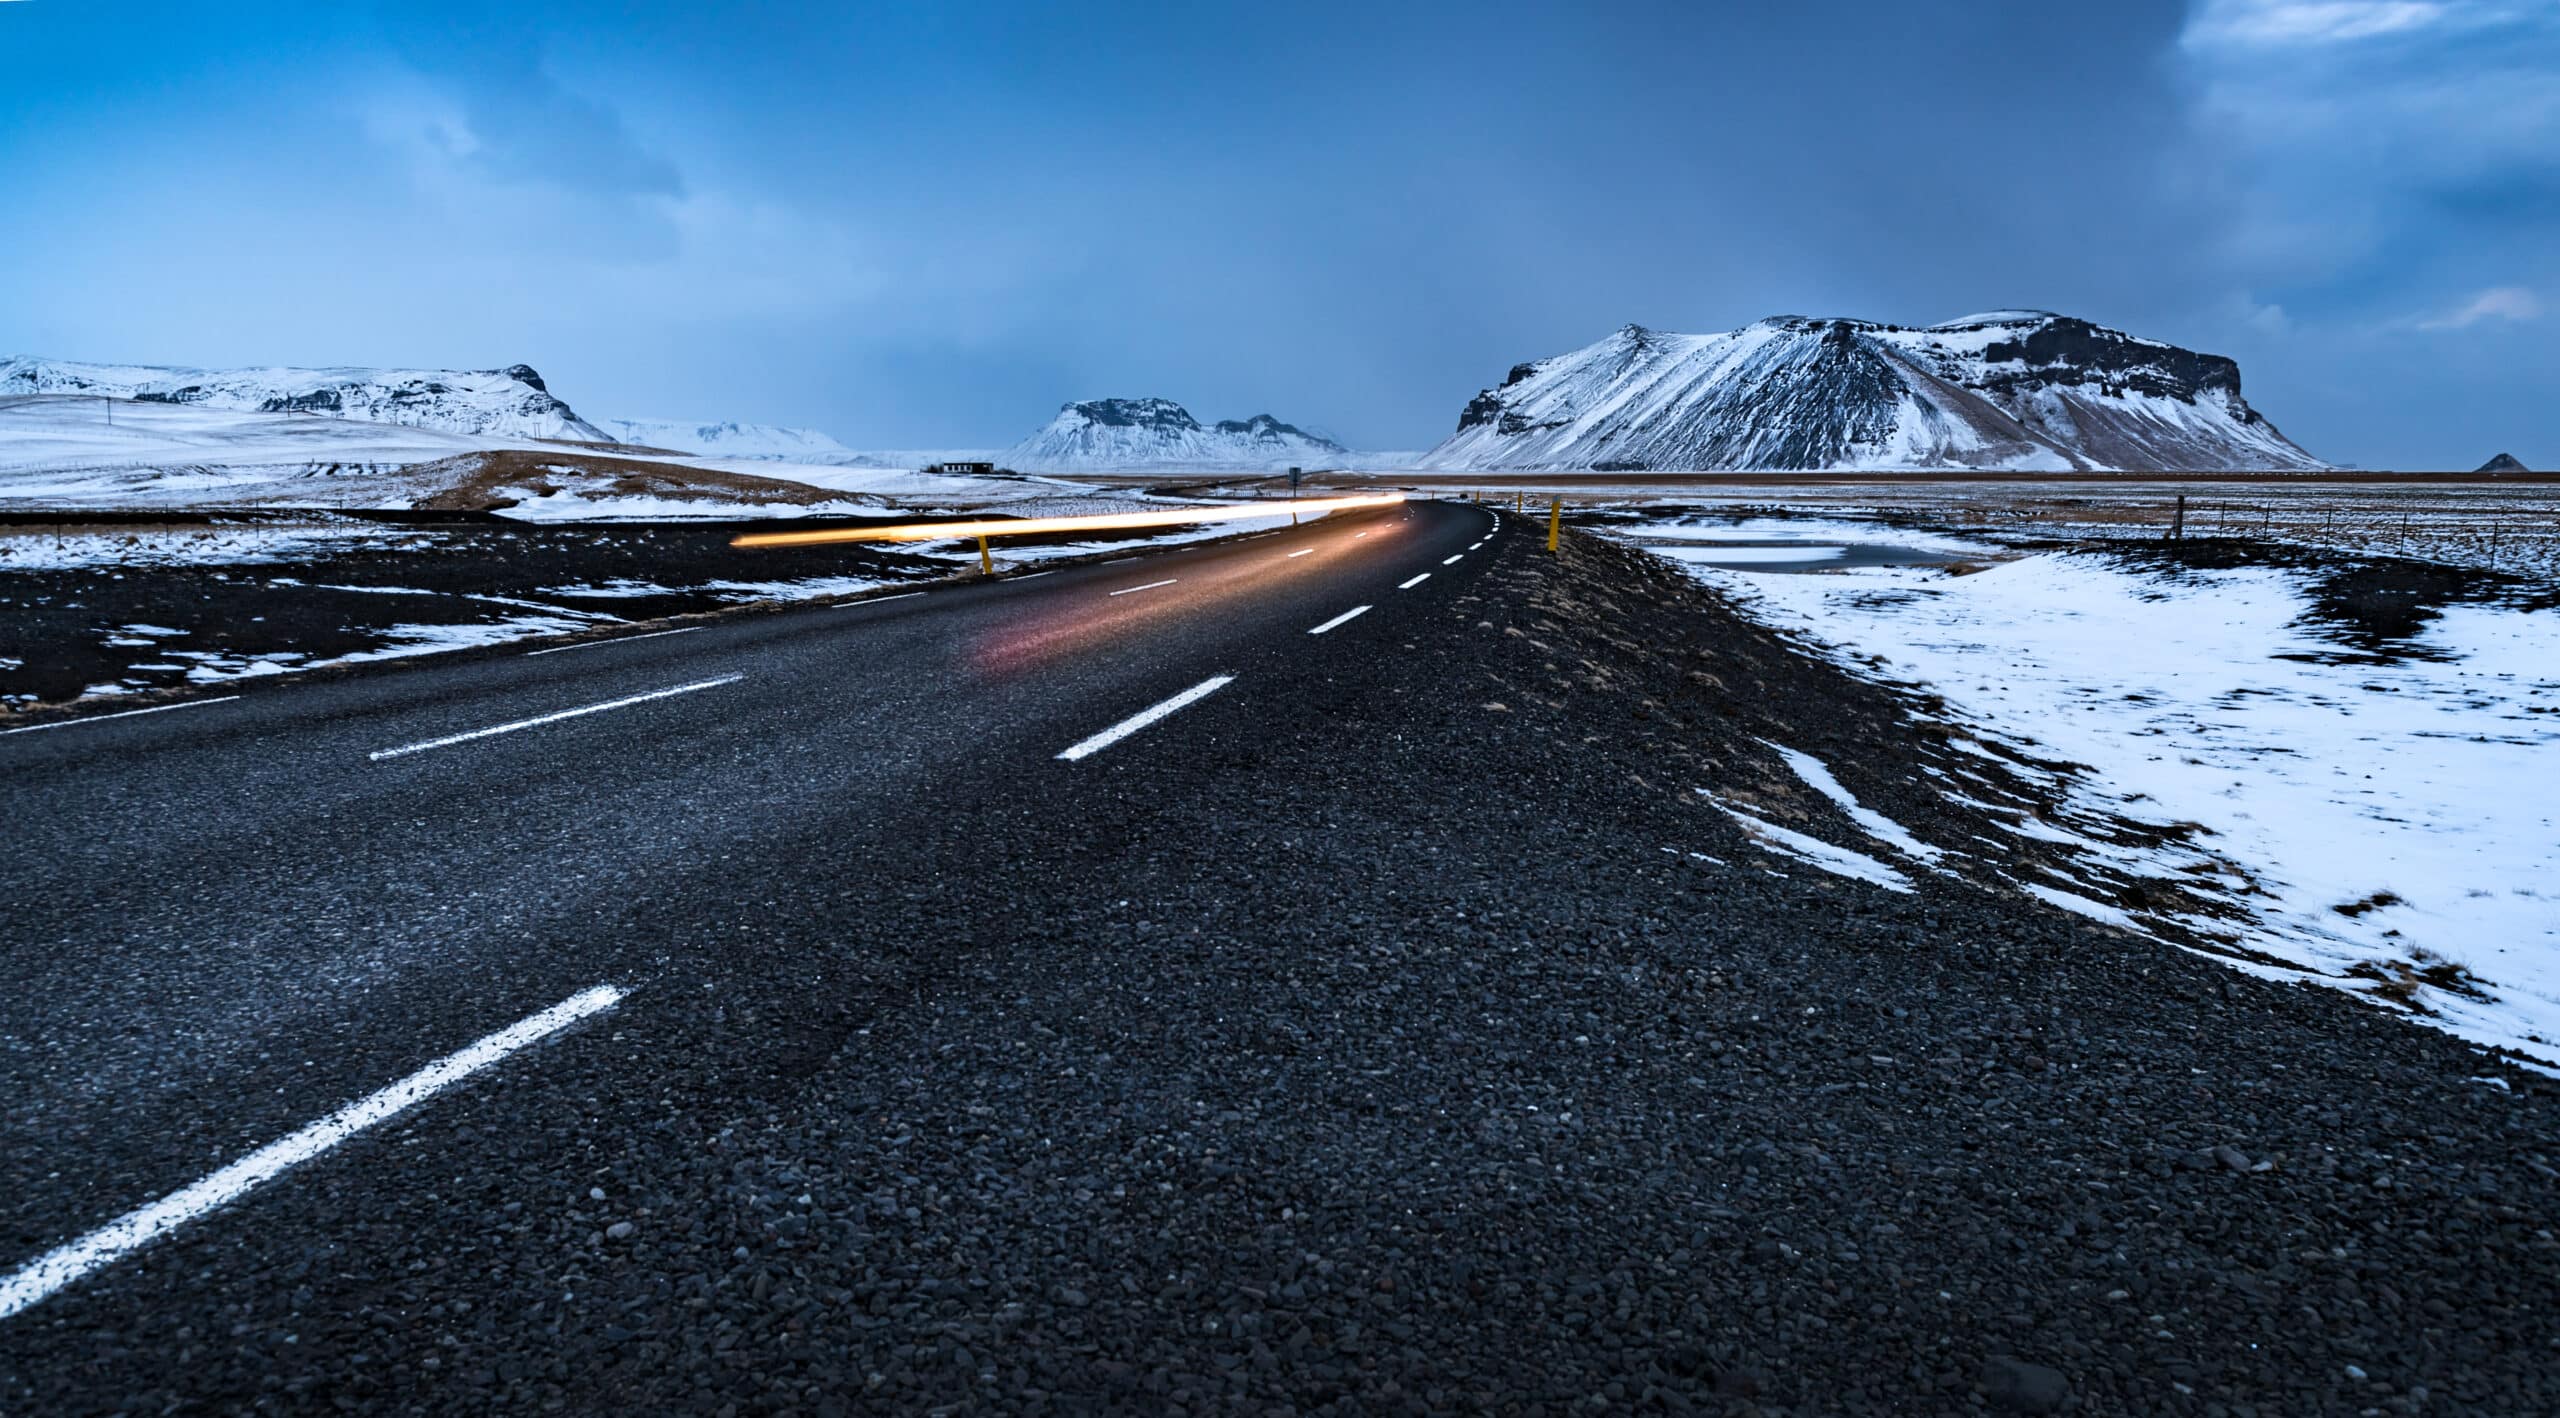 Beautiful winter landscape, empty highway with snowy roadside around it, wintertime road trip vacation in Iceland